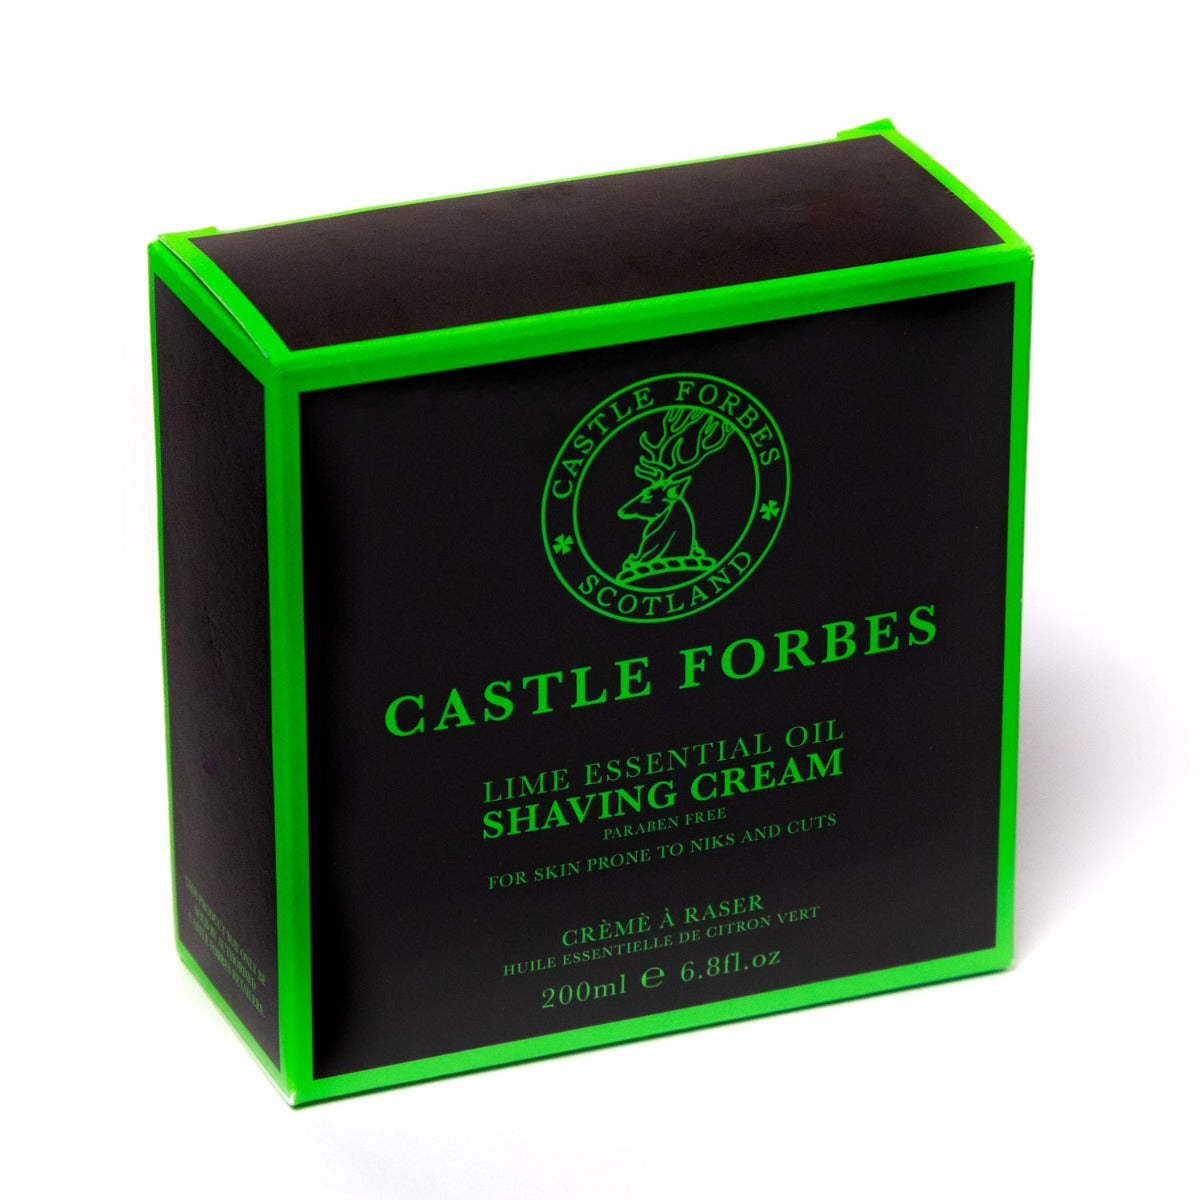 Castle Forbes Lime Essential Oil Shaving Cream with lather by KirbyAllison.com.